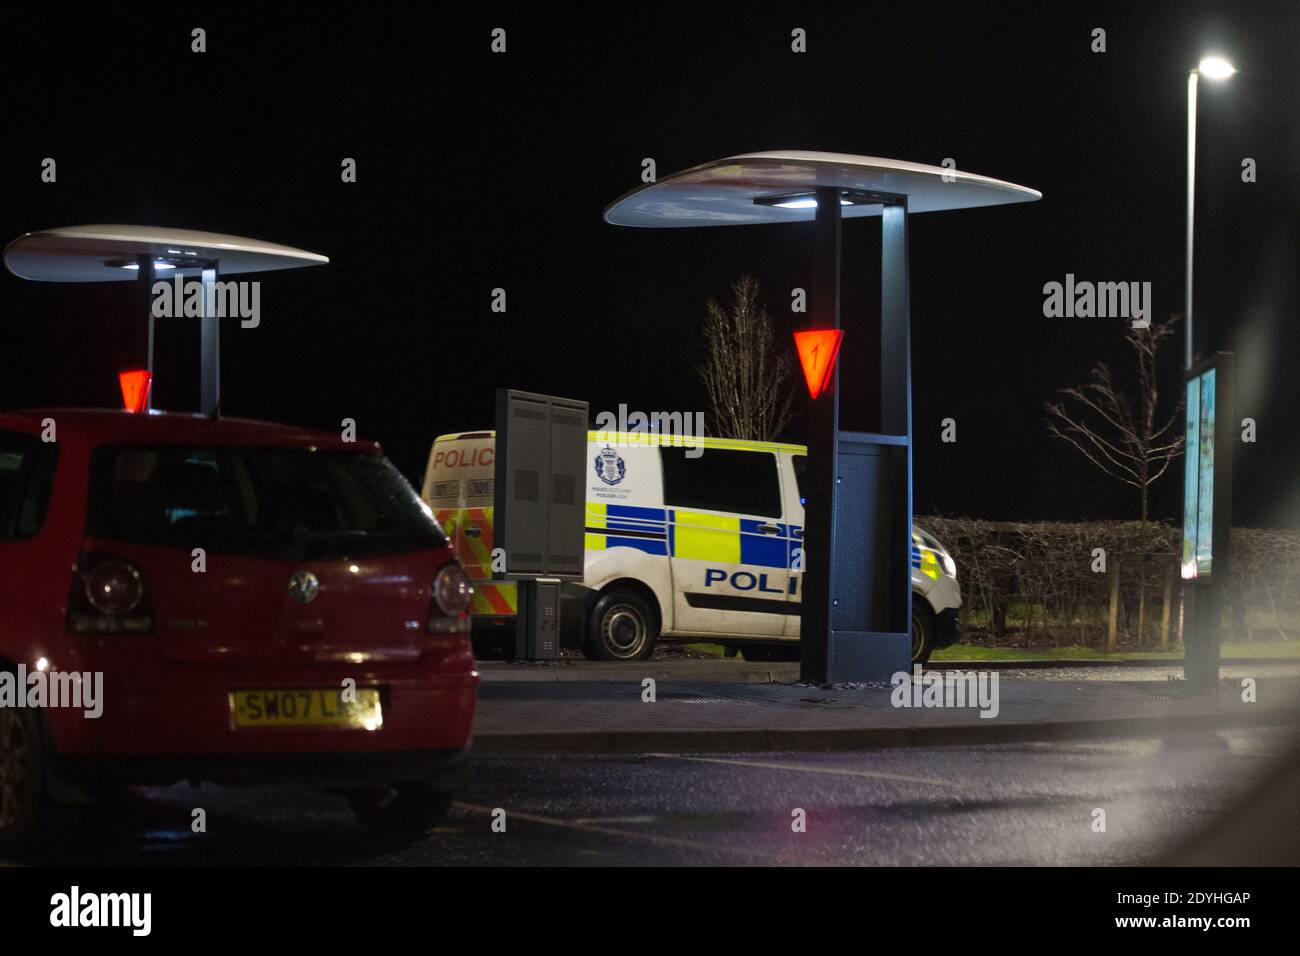 Dunbar, Scotland, UK. 26th Dec, 2020. Pictured: After being on the road for 5 hours plus including being at the Scottish/English border for 2 hours this is the first police car/van that I have seen, at McDonalds Drive Thru, after driving back up to Dunbar from the border. Credit: Colin Fisher/Alamy Live News Stock Photo